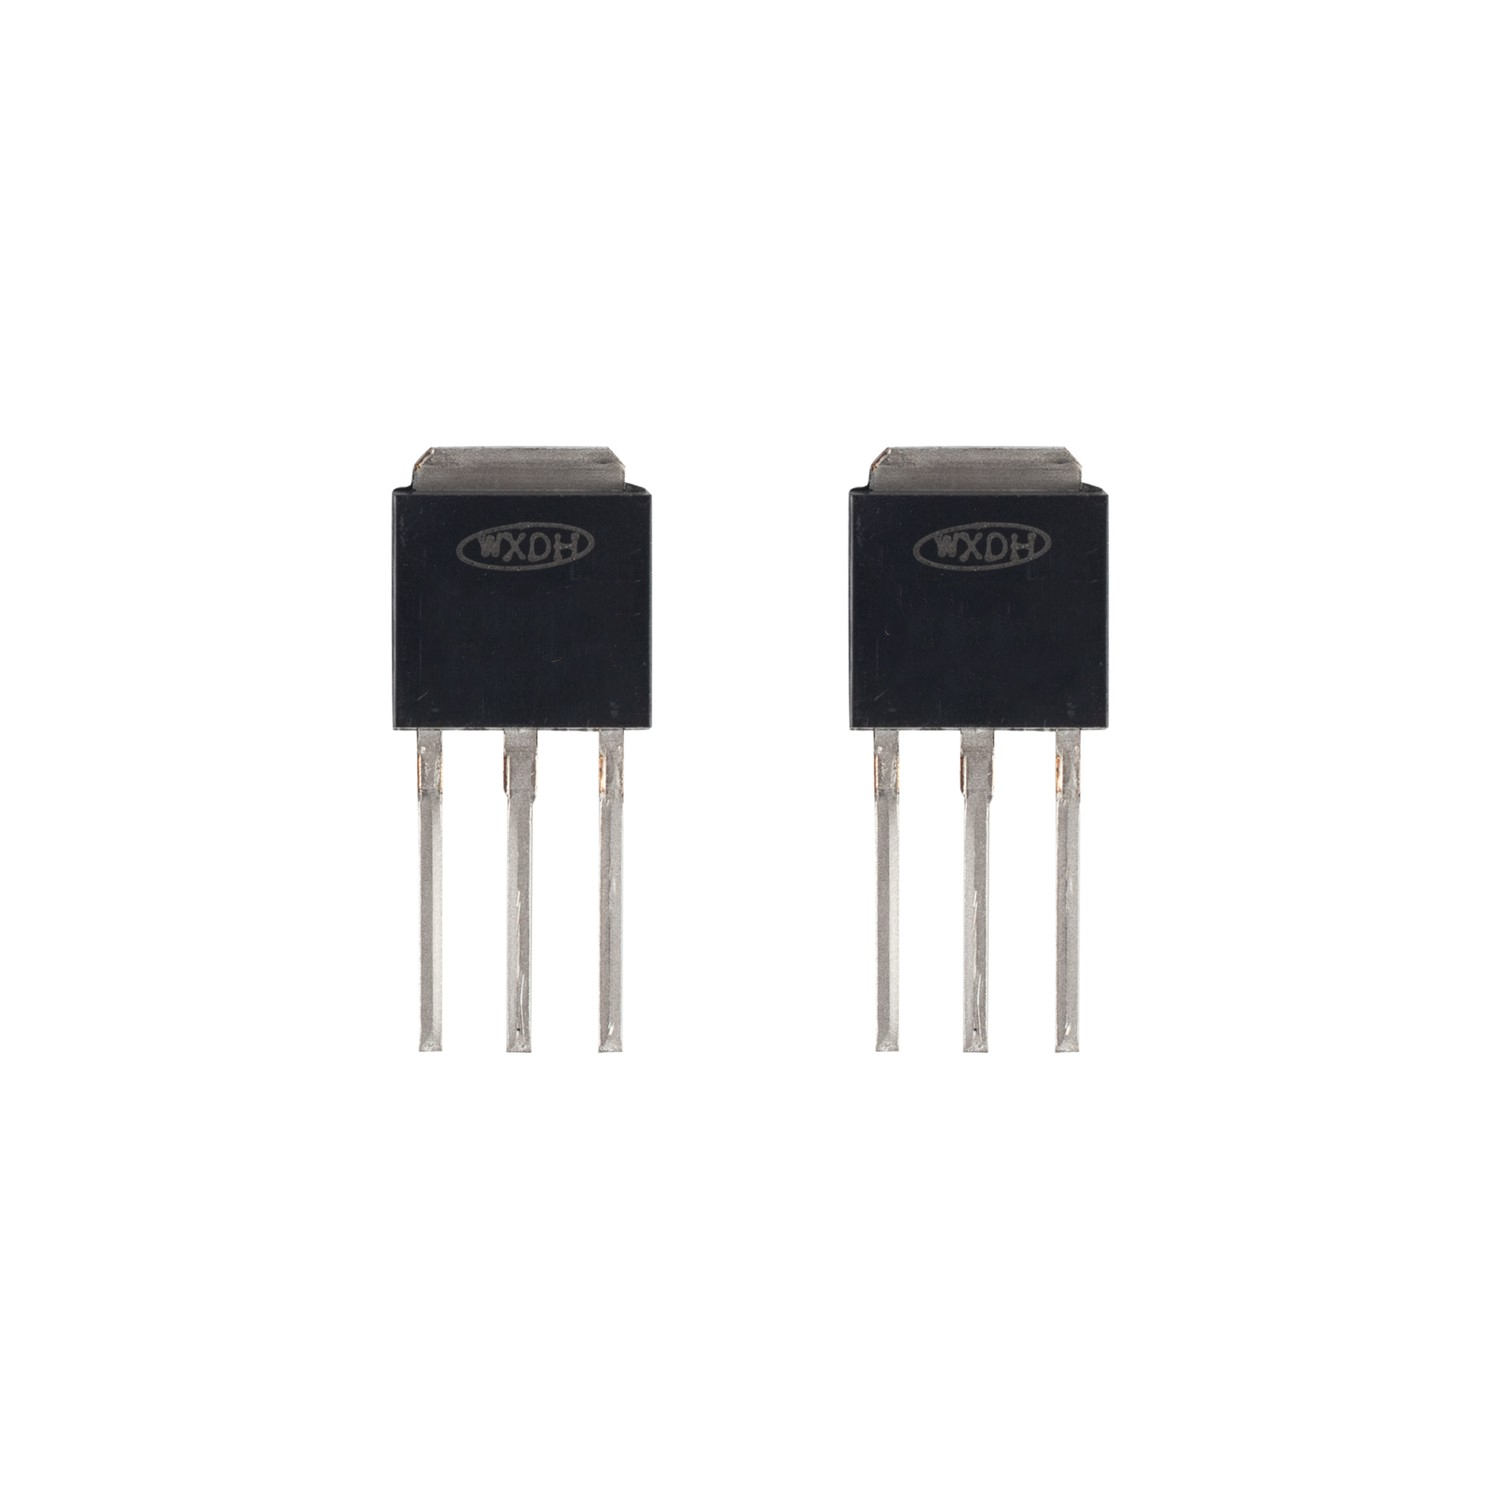 7A 650V N-channel Enhancement Mode Power MOSFET